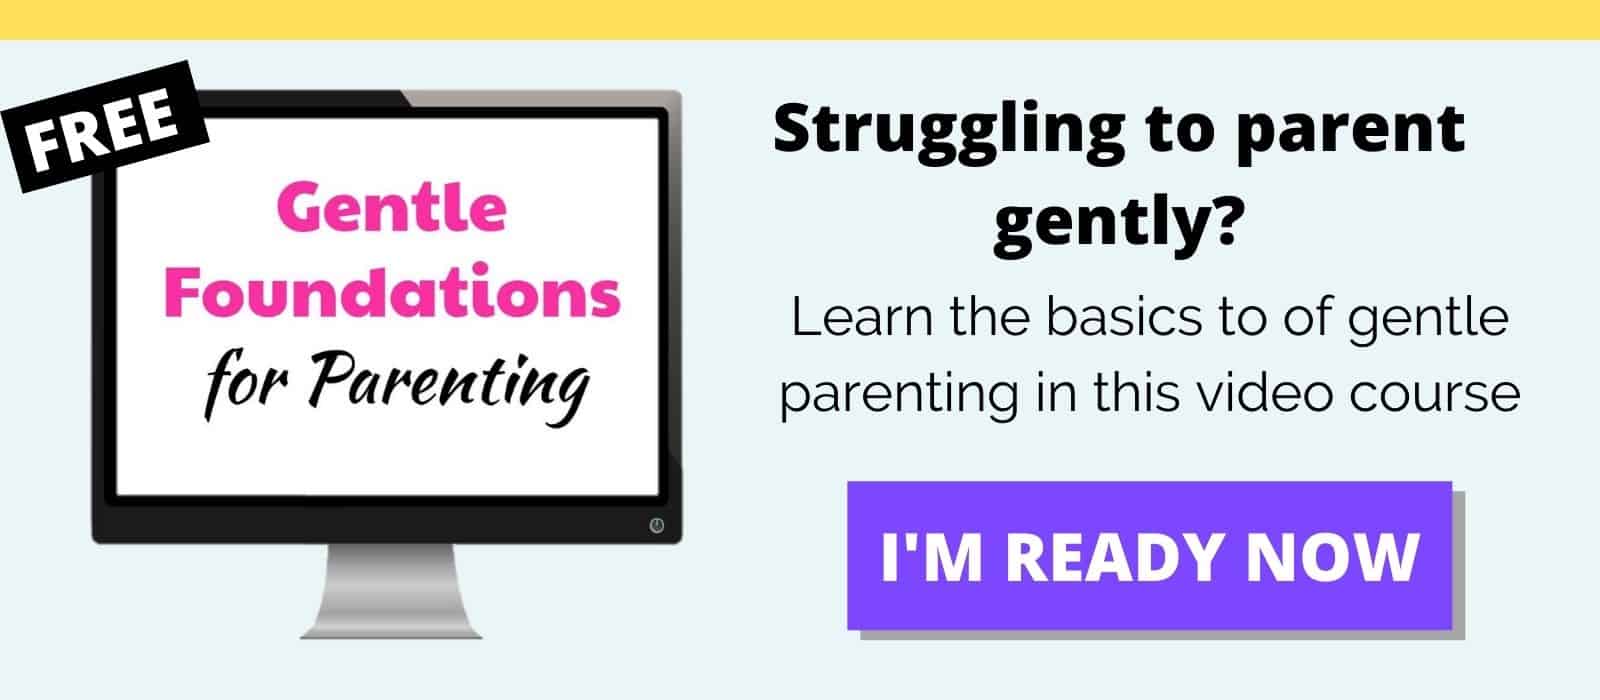 gentle foundations click to opt in - free video course teaching gentle parenting